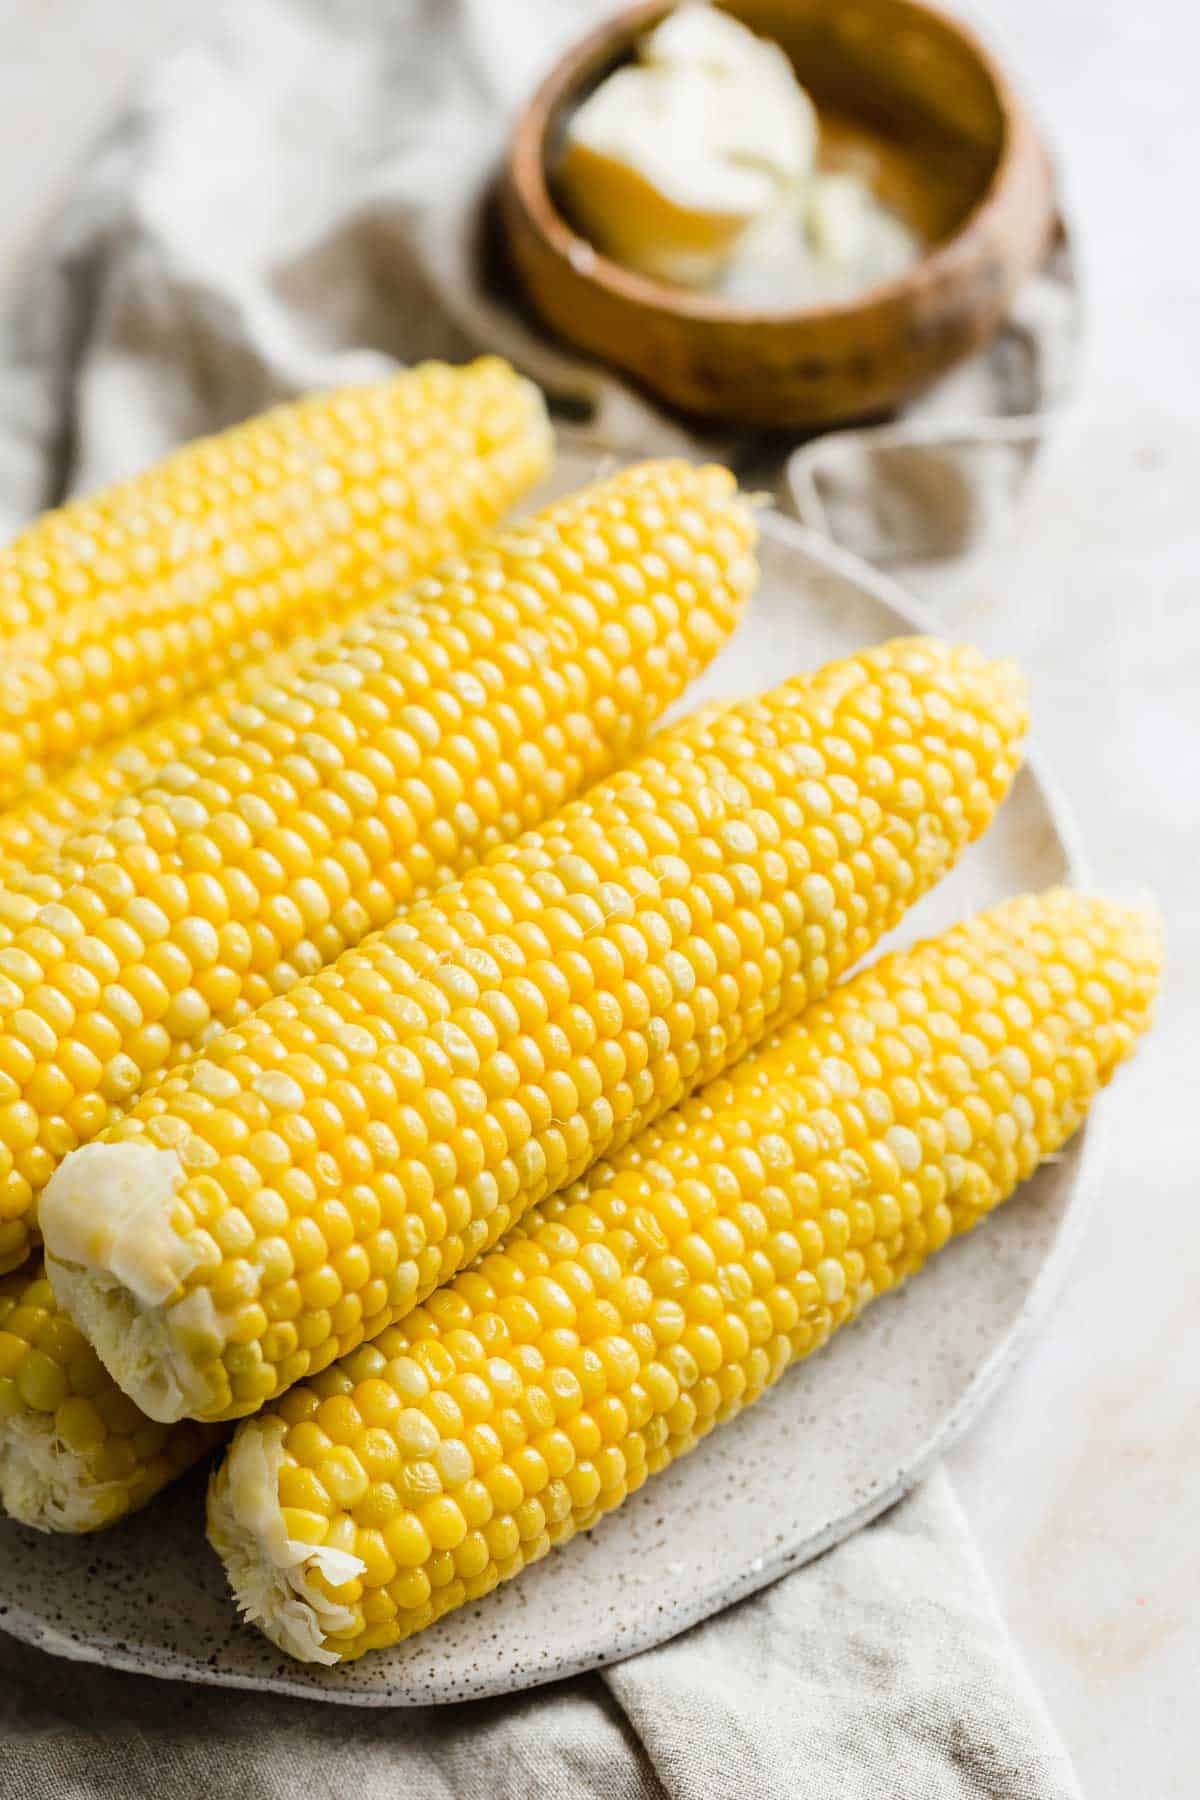 Perfectly boiled corn on a white plate with a bowl of butter in the background.